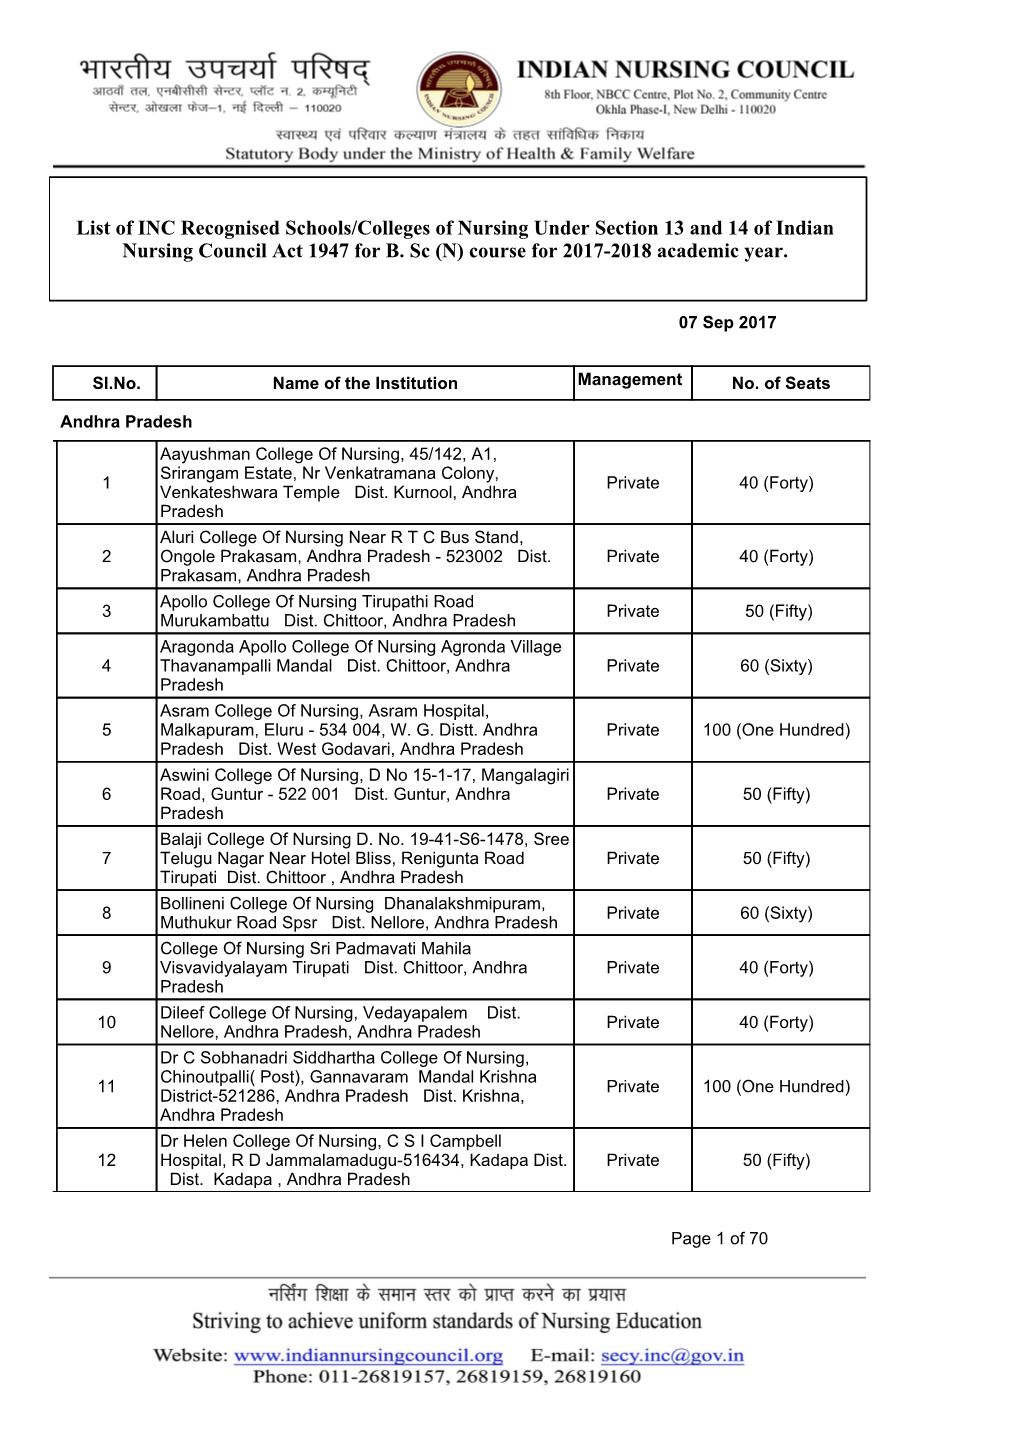 List of INC Recognised Schools/Colleges of Nursing Under Section 13 and 14 of Indian Nursing Council Act 1947 for B